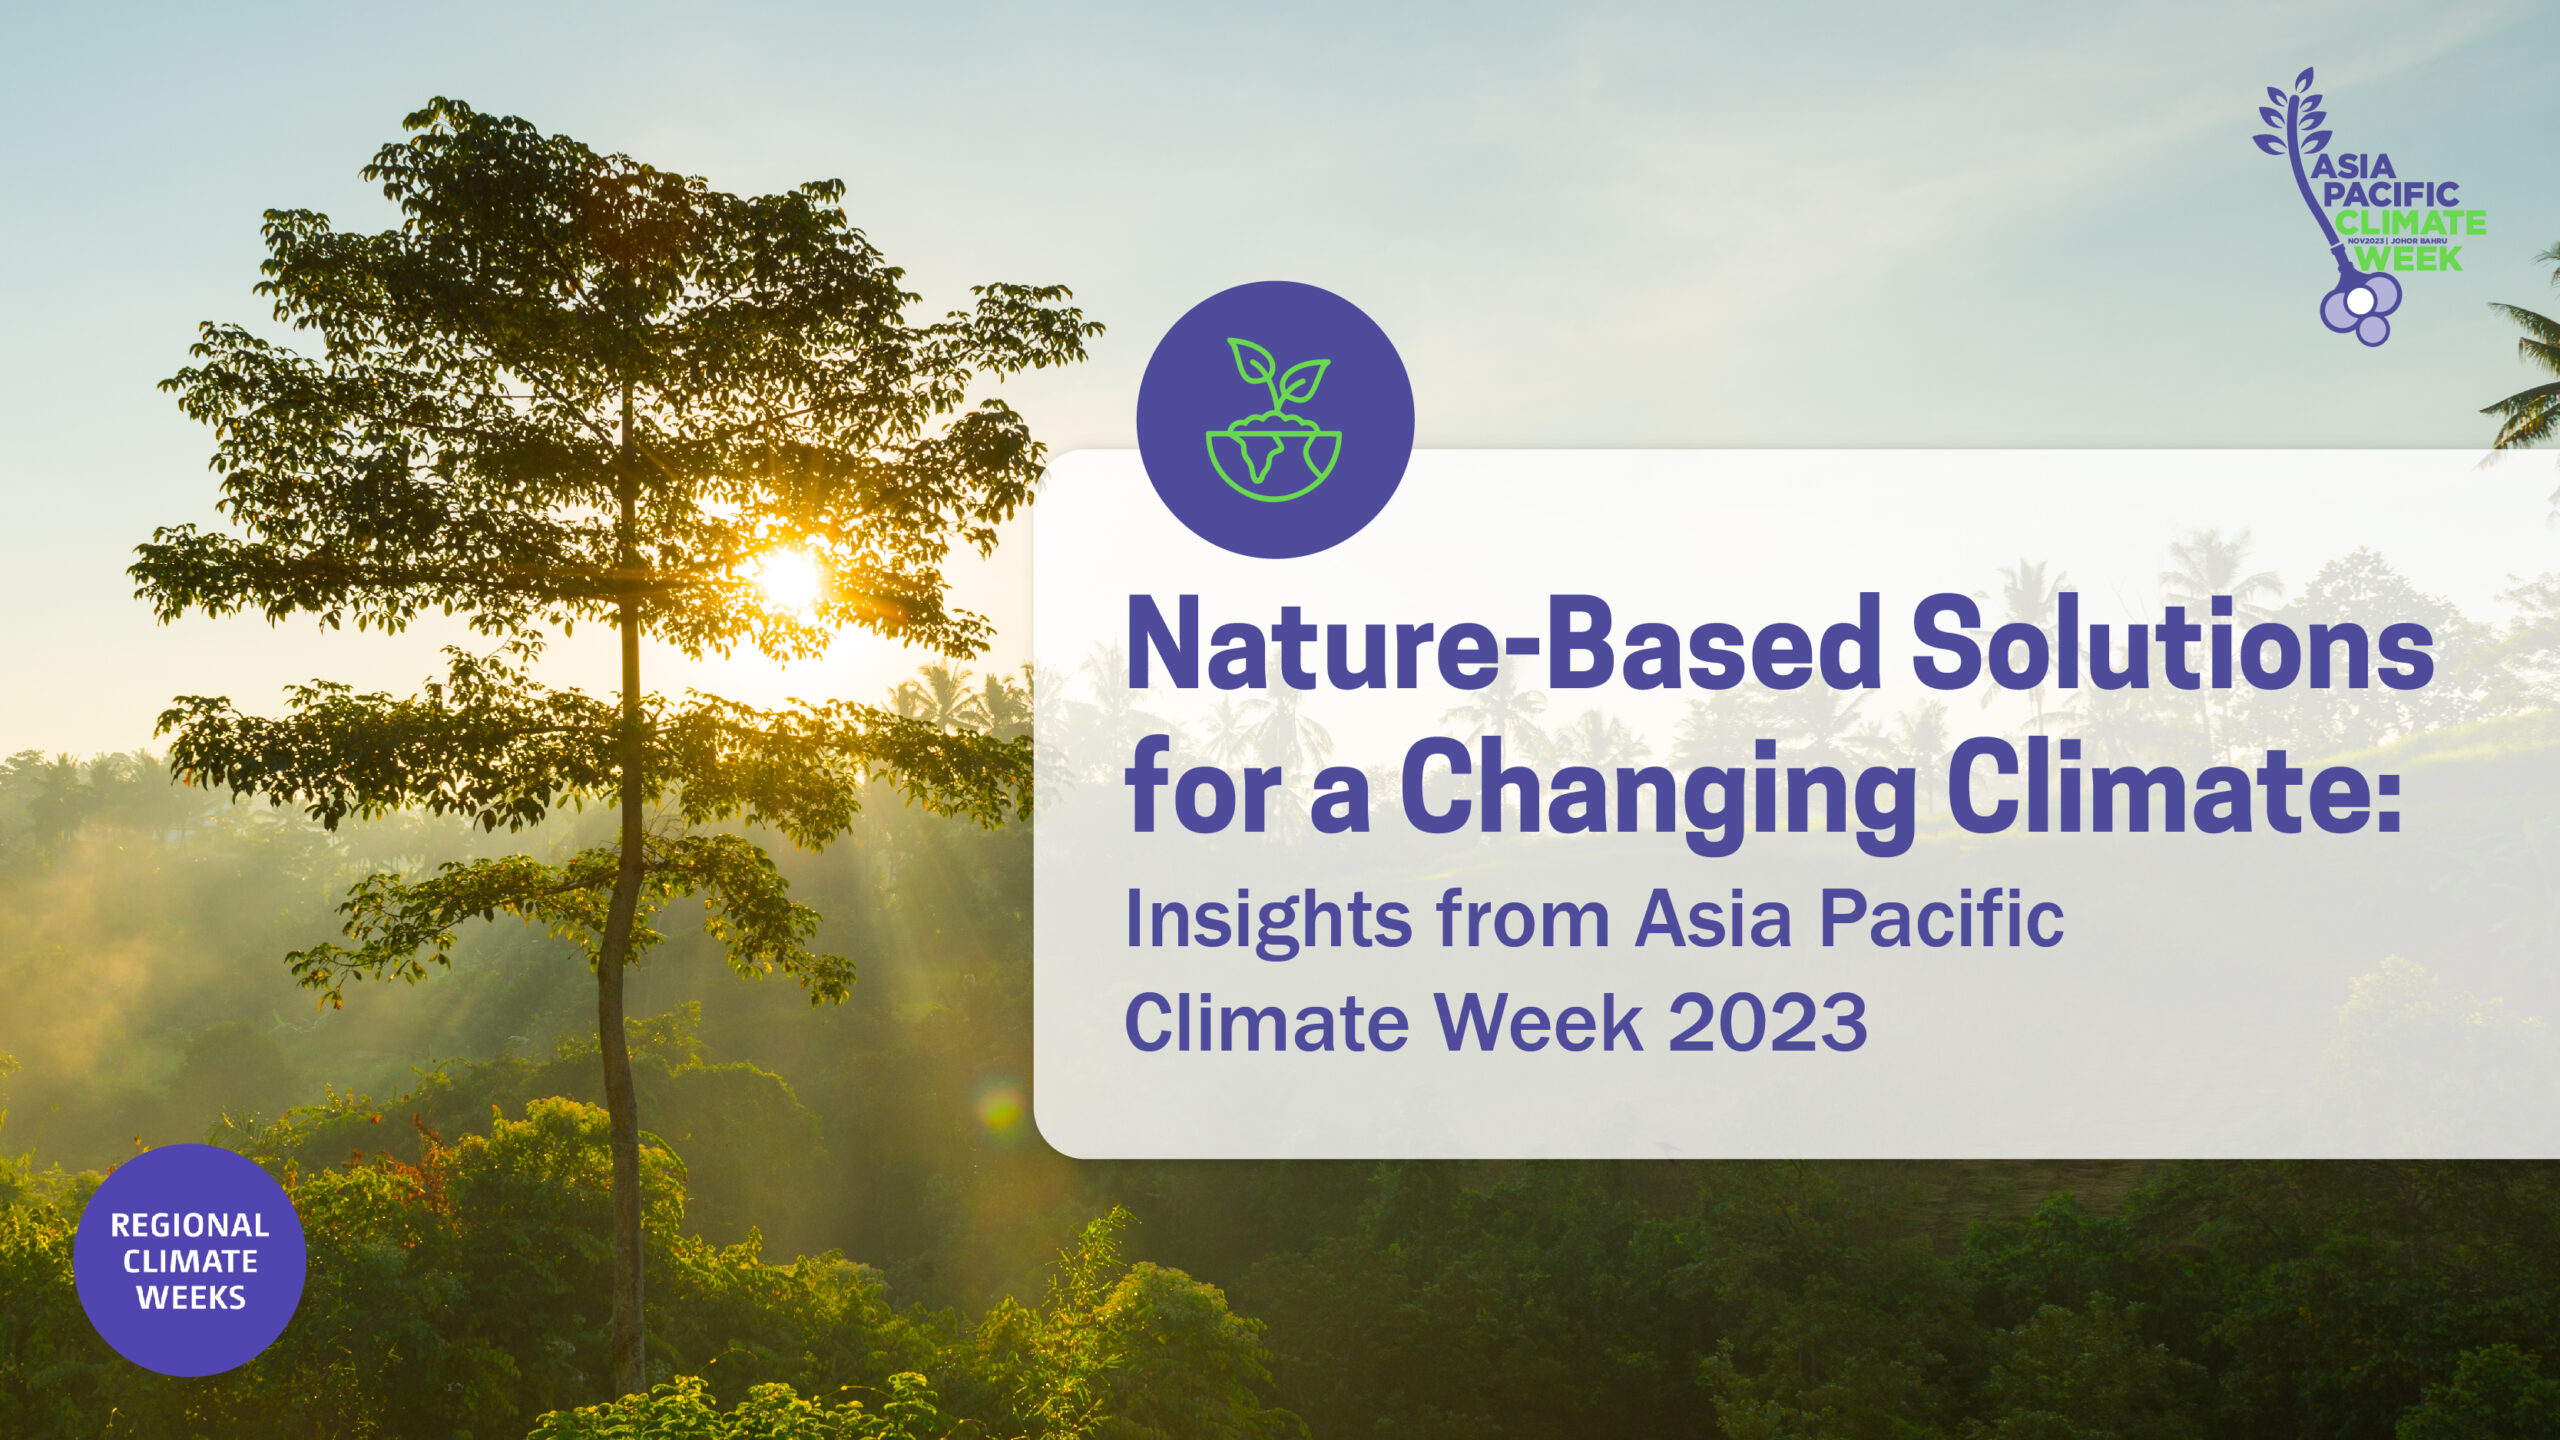 Nature-Based Solutions for a Changing Climate